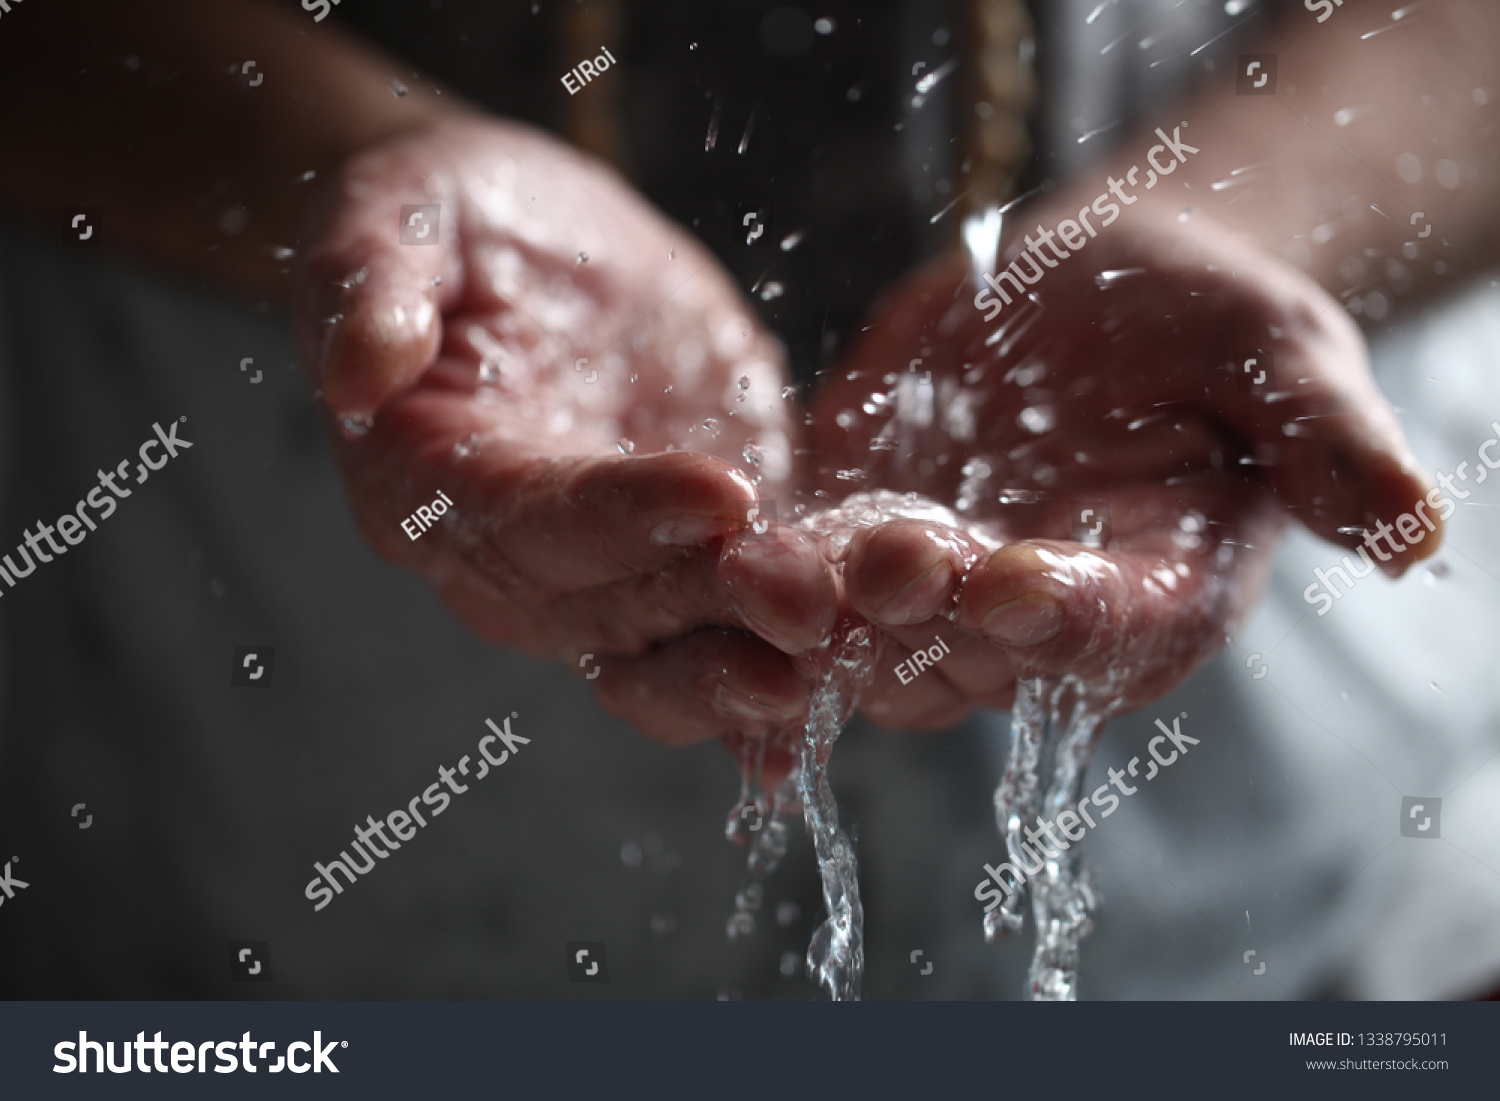 Muslim man washes his hands before prayer ritual cleansing. #1338795011